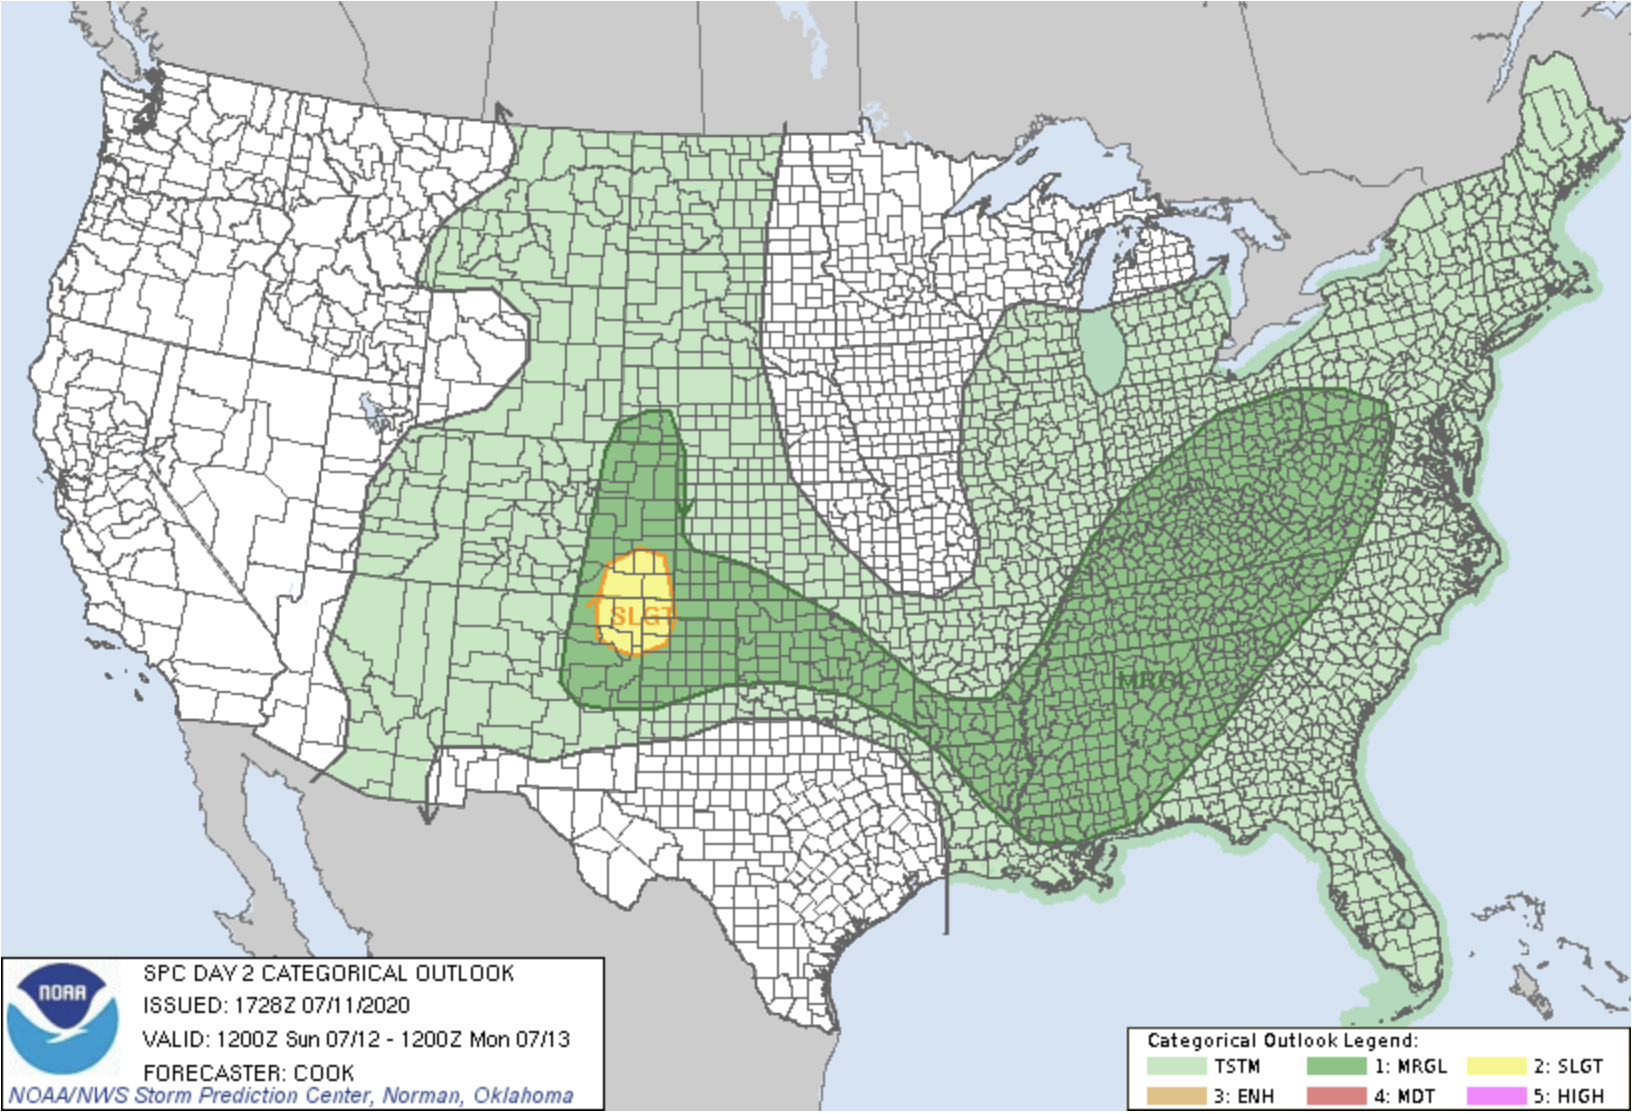 MAP Convective outlook for July 12, 2020 - NWS